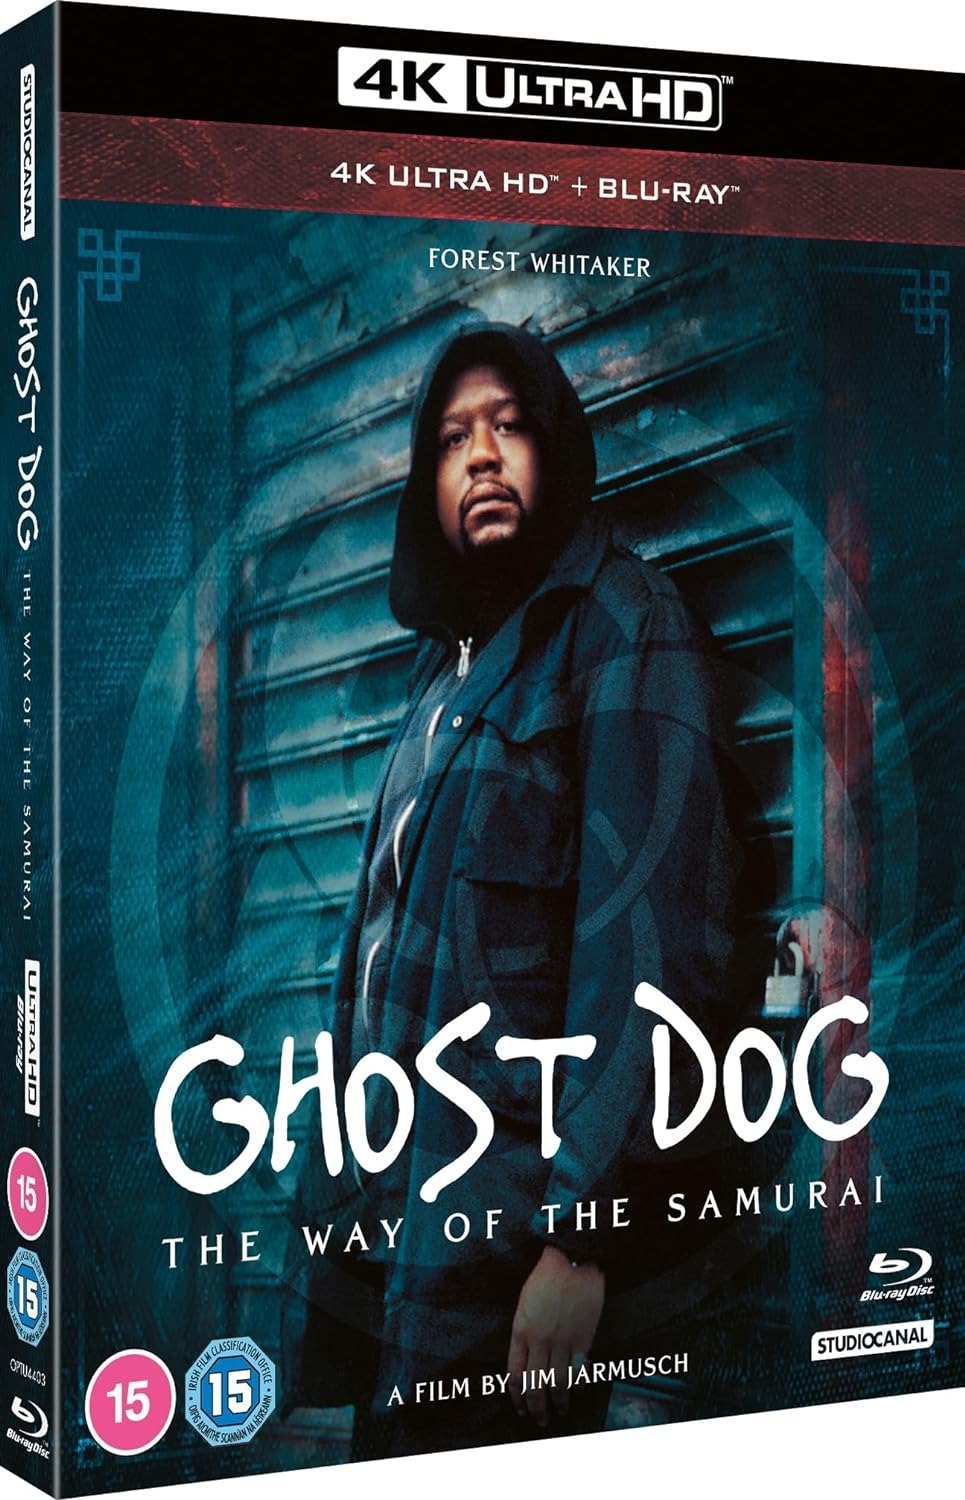 Ghost Dog: The Way of the Samurai 4K (sans fourreau) (1999) - front cover